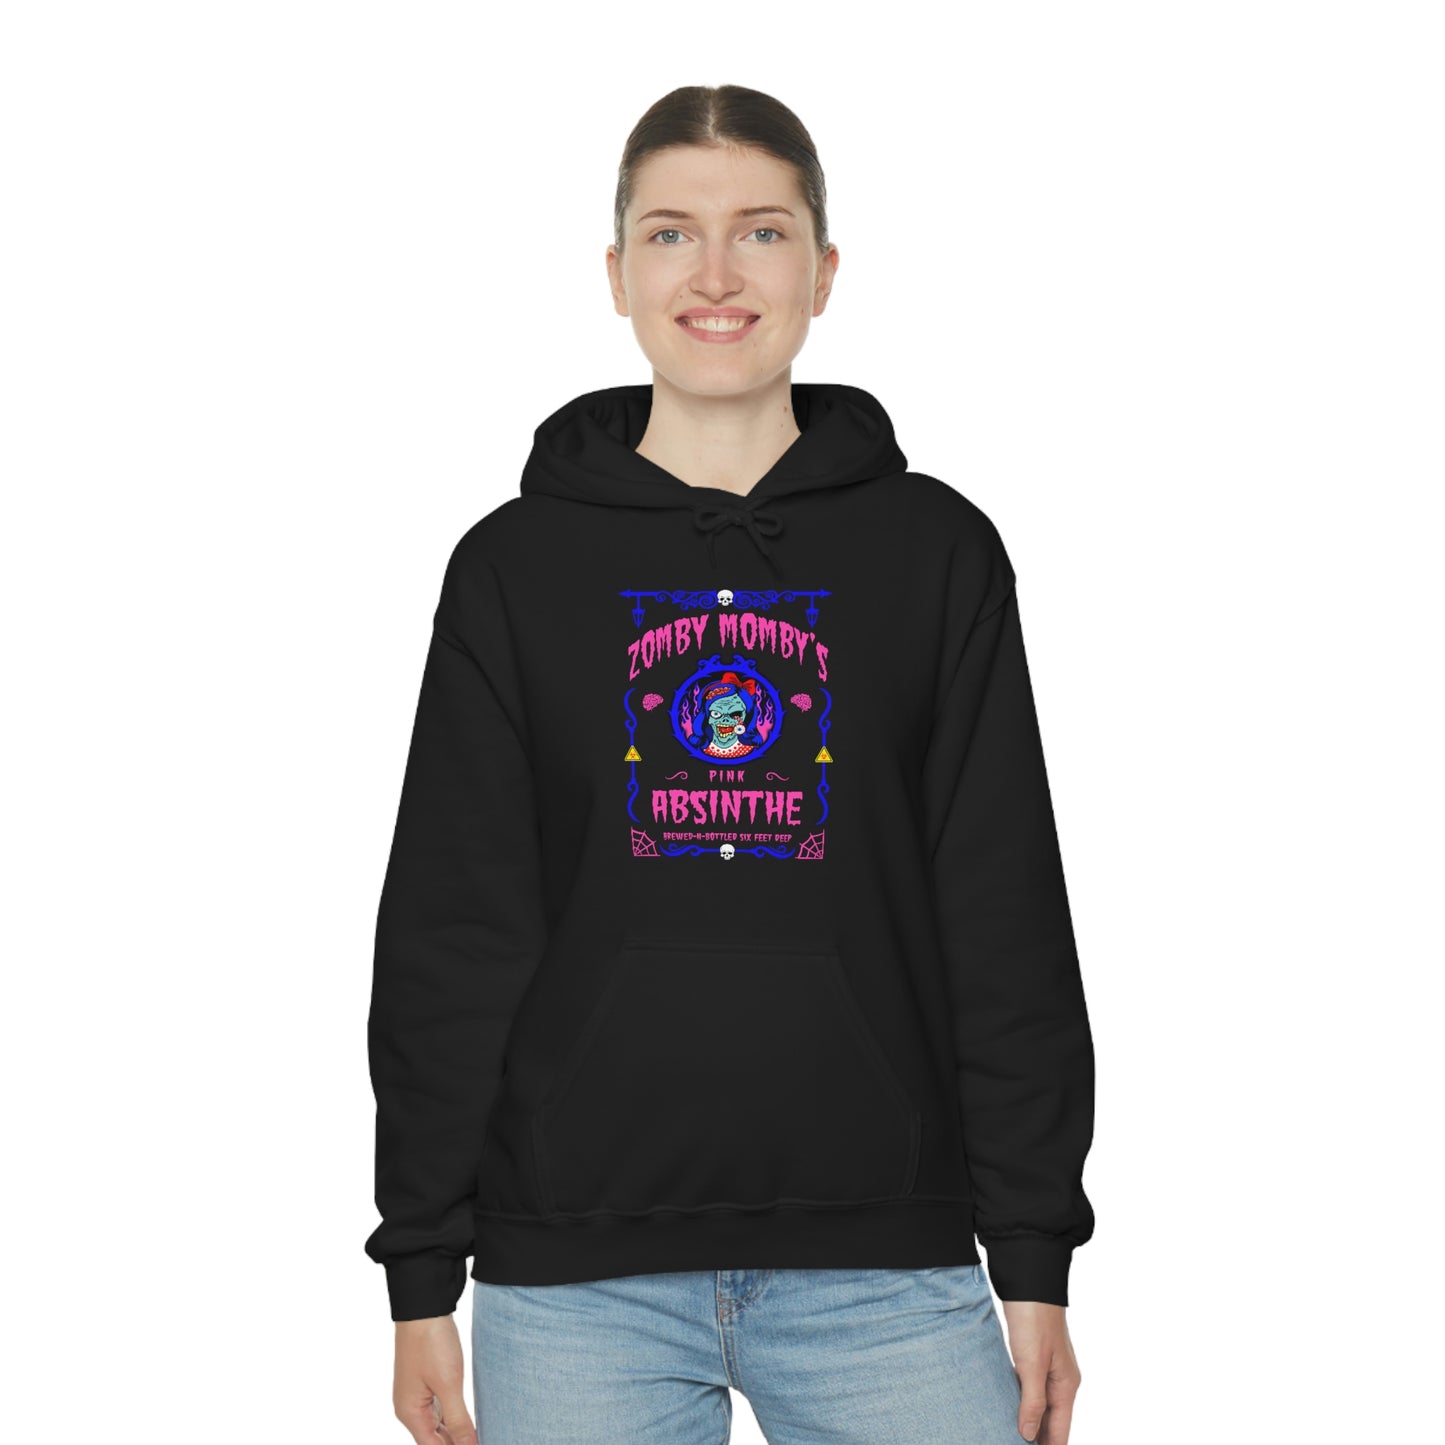 ABSINTHE MONSTERS 12 (ZOMBY MOMBY) Unisex Heavy Blend™ Hooded Sweatshirt